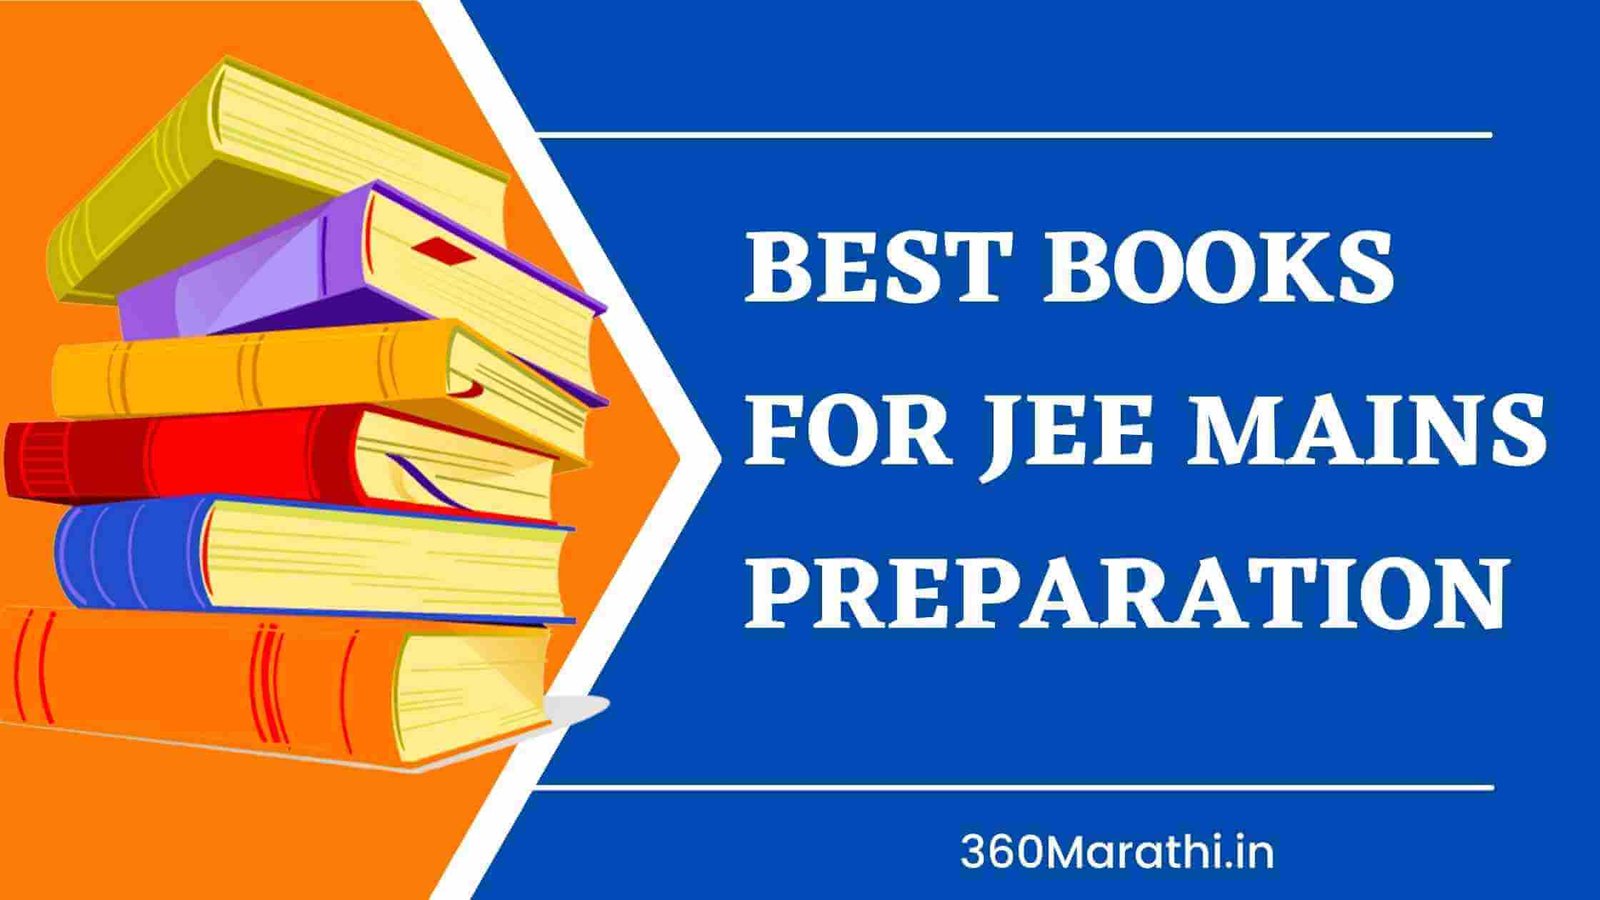 Best Books For Jee Mains Preparation